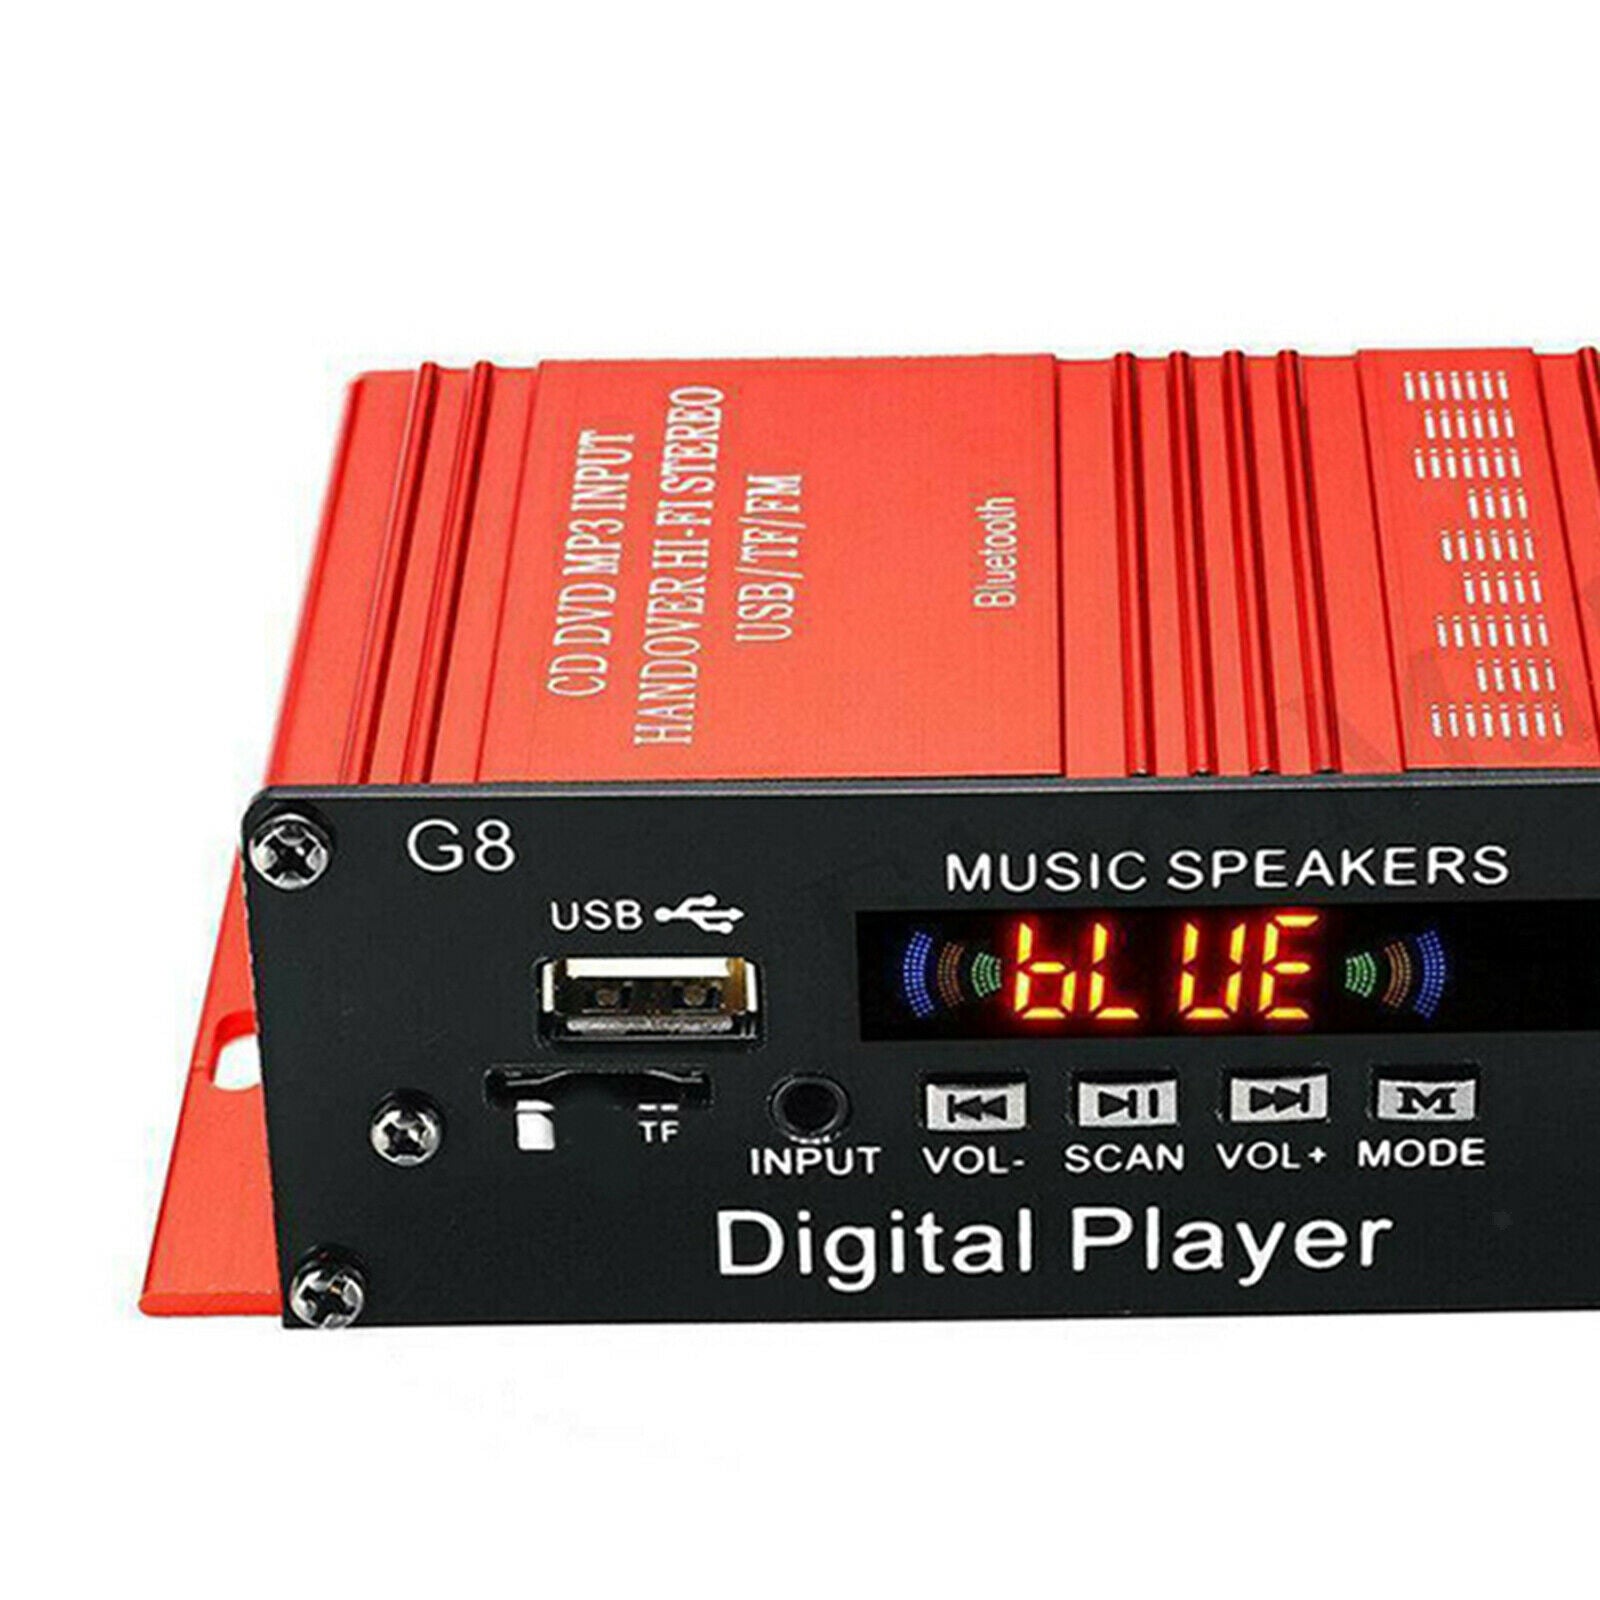 G8 200W Bluetooth Stereo 2 Channel Amplifier HiFi 2.0 CH with Remote Control